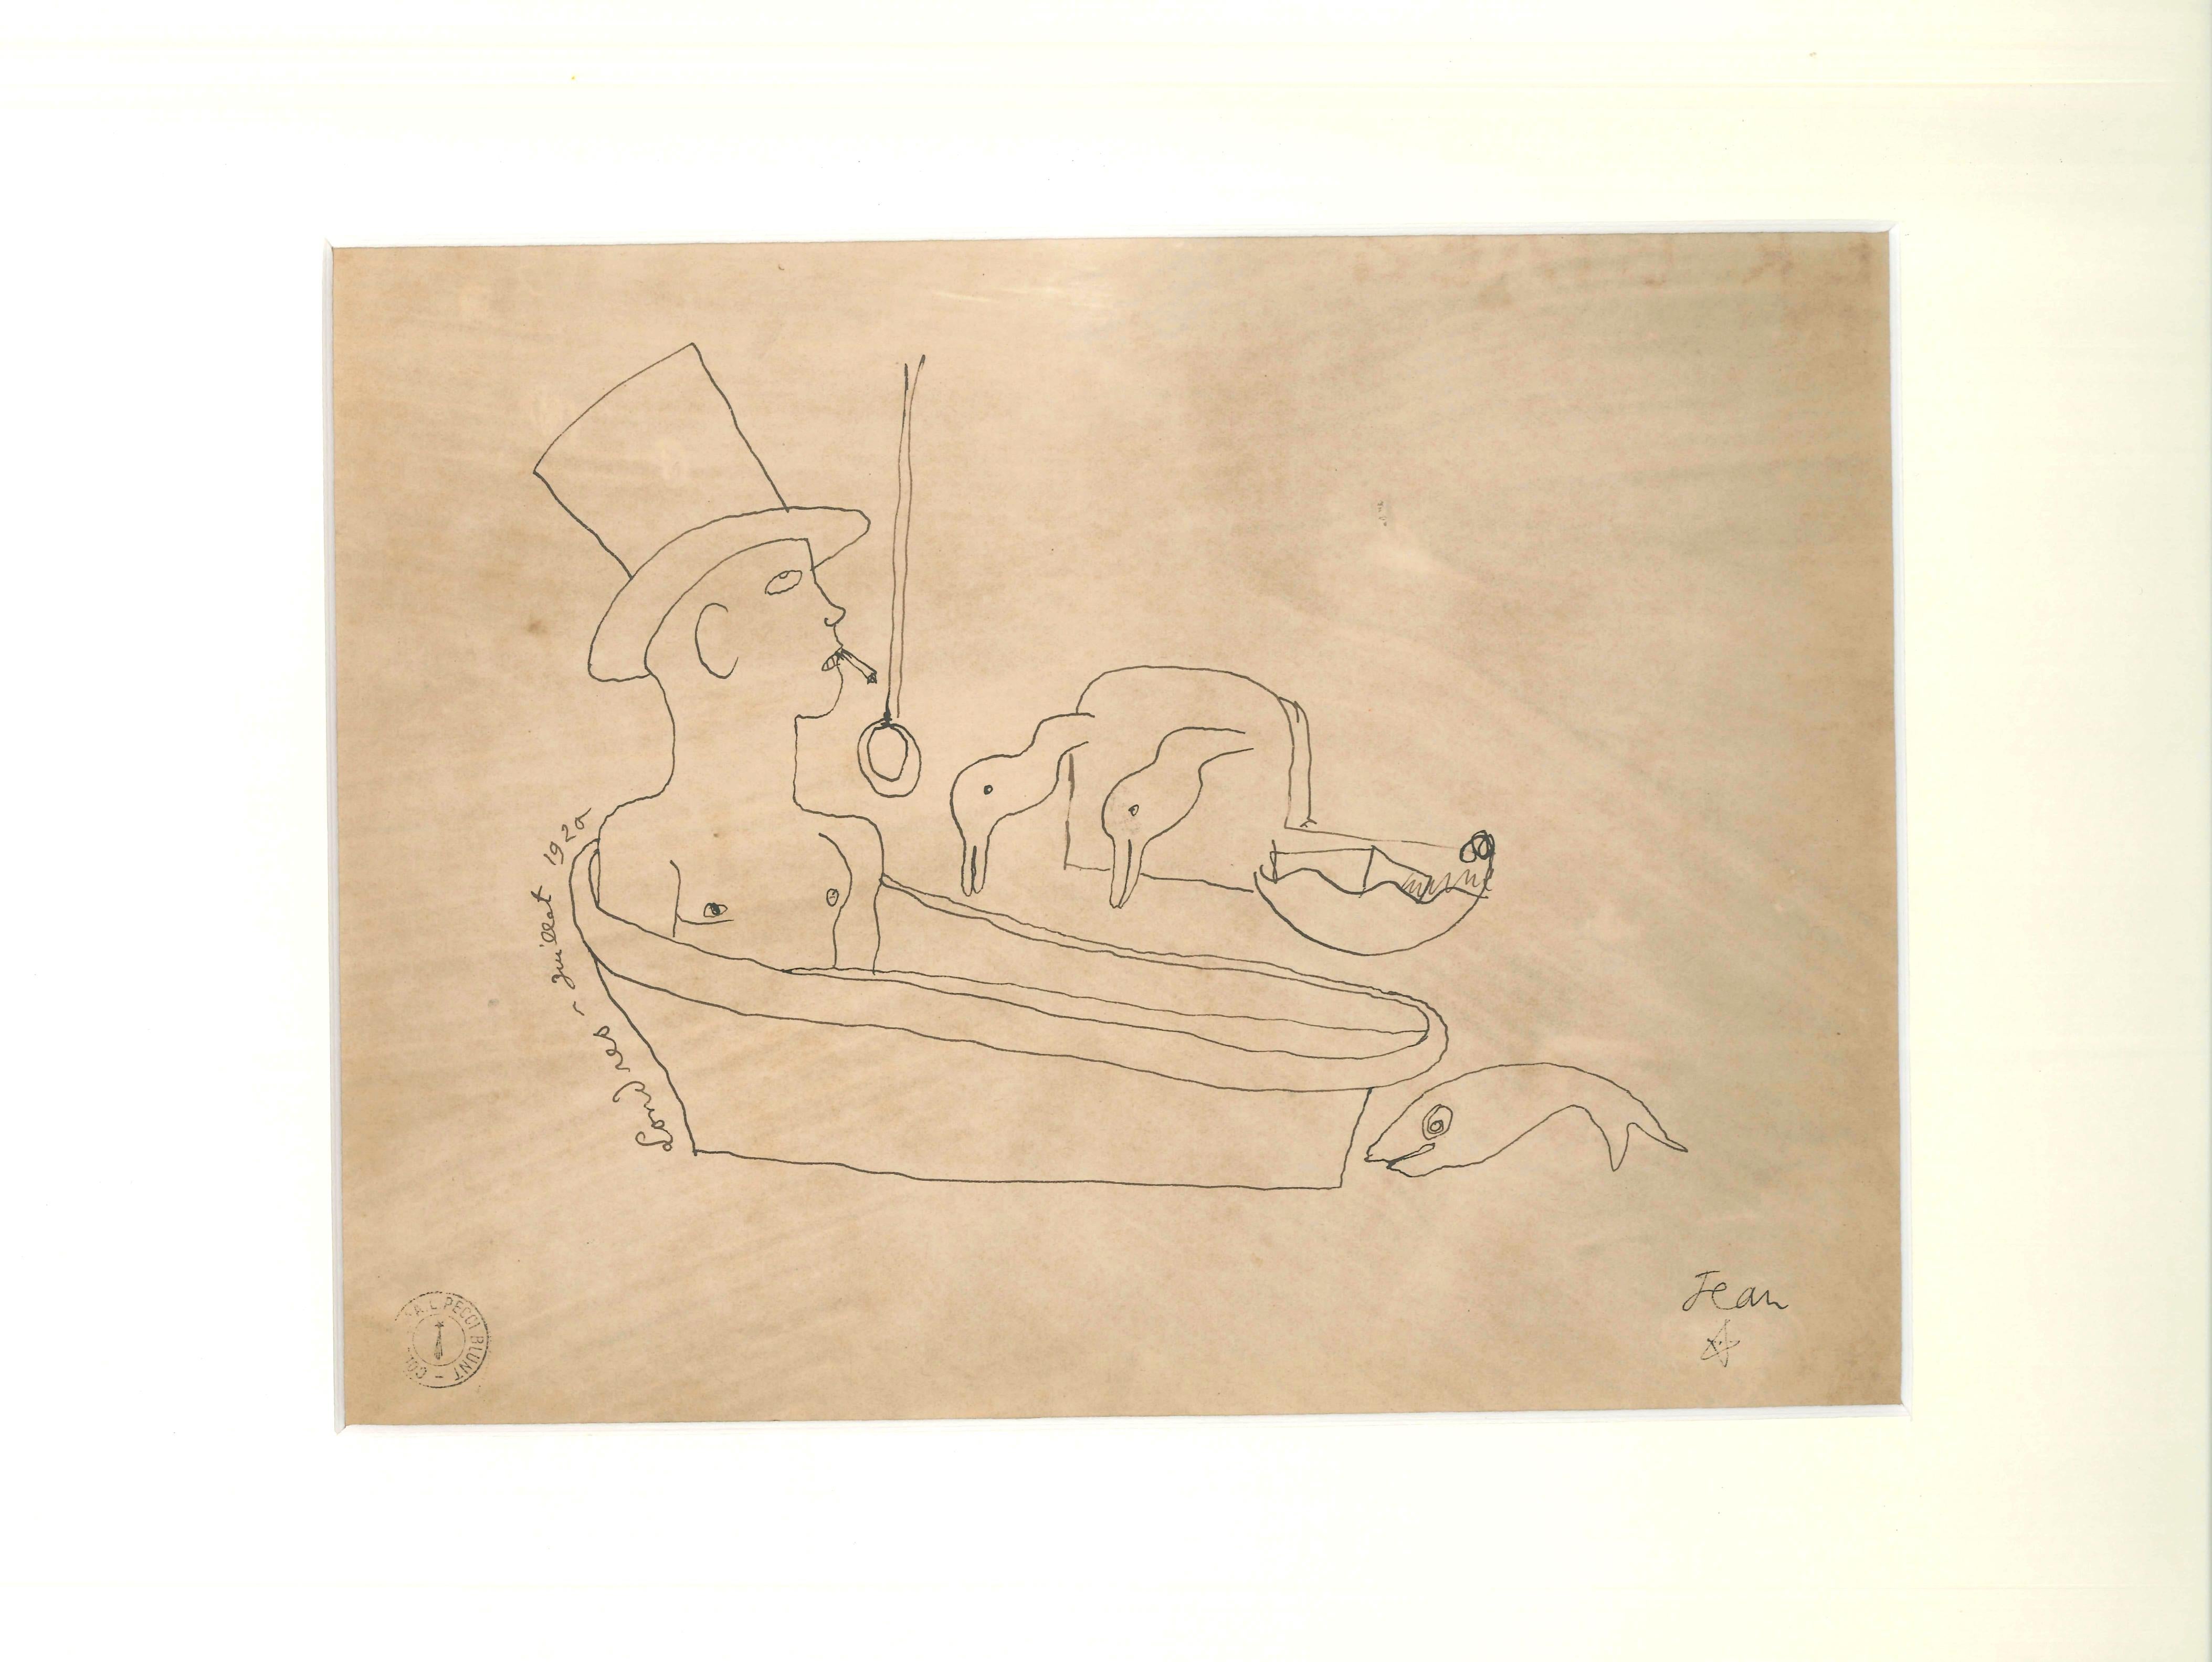 Londres - Original China Ink Drawing by J. Cocteau - 1920 - Modern Art by Jean Cocteau